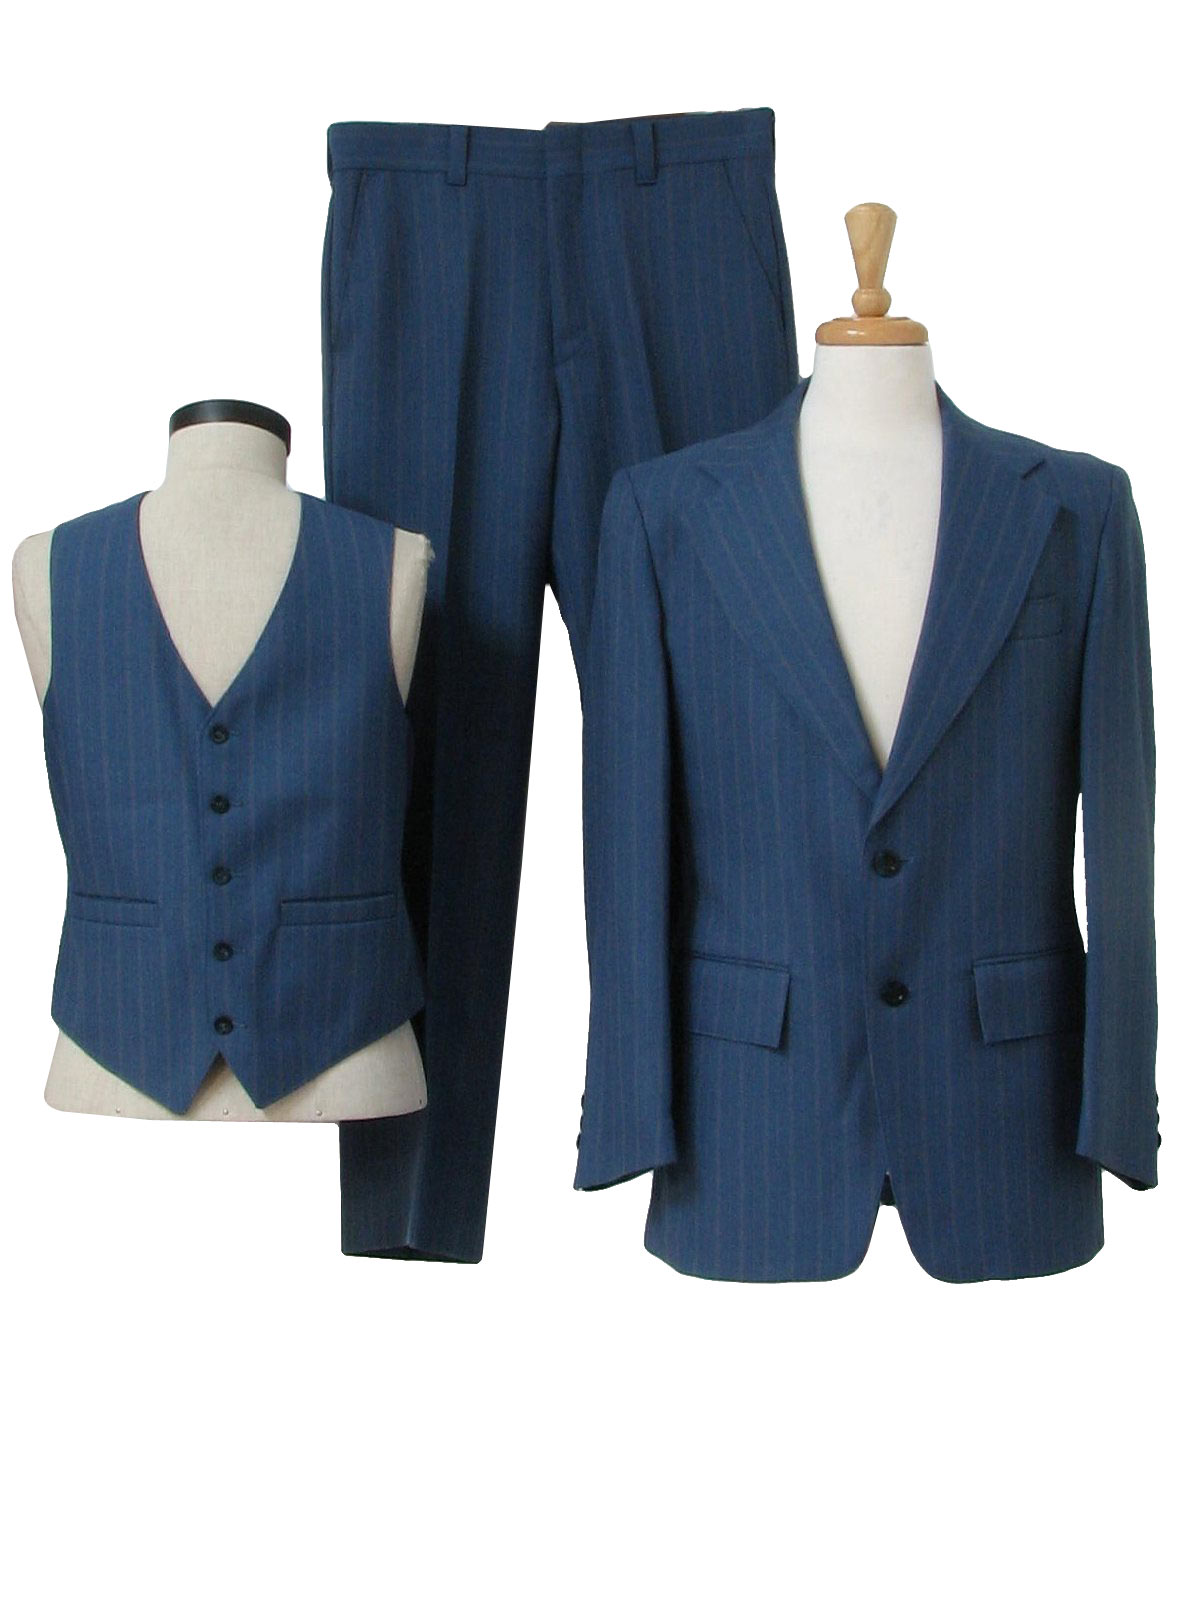 JCPenney 1970s Vintage Disco Suit: 70s -JCPenney- Mens shaded blue ...